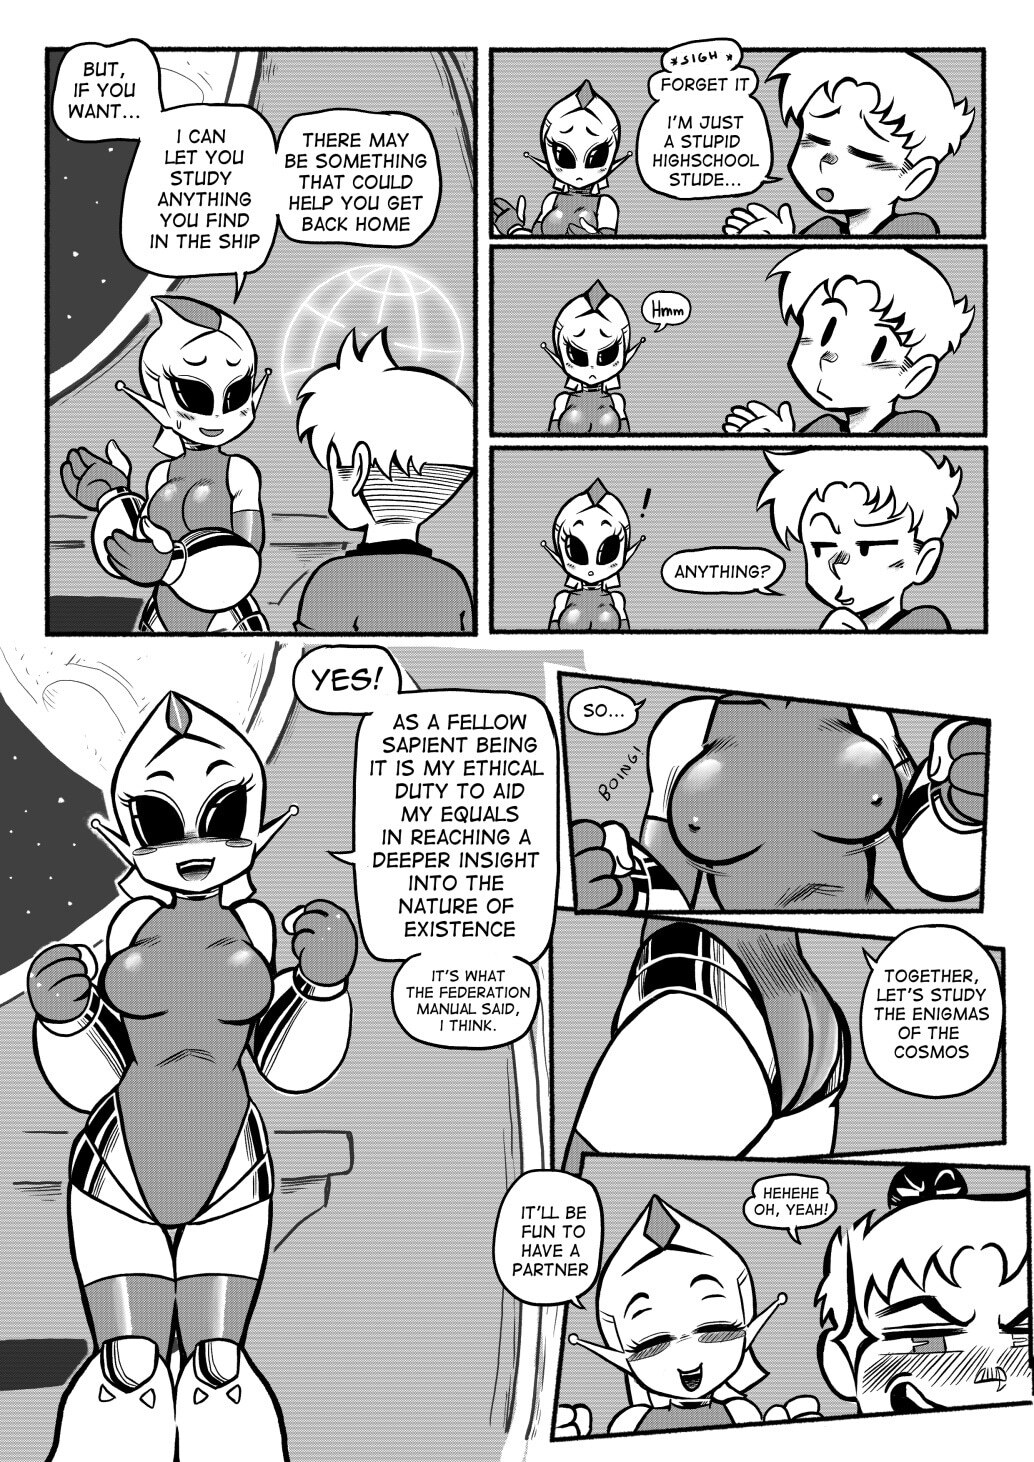 Abducted! - Mr.E - Page 11